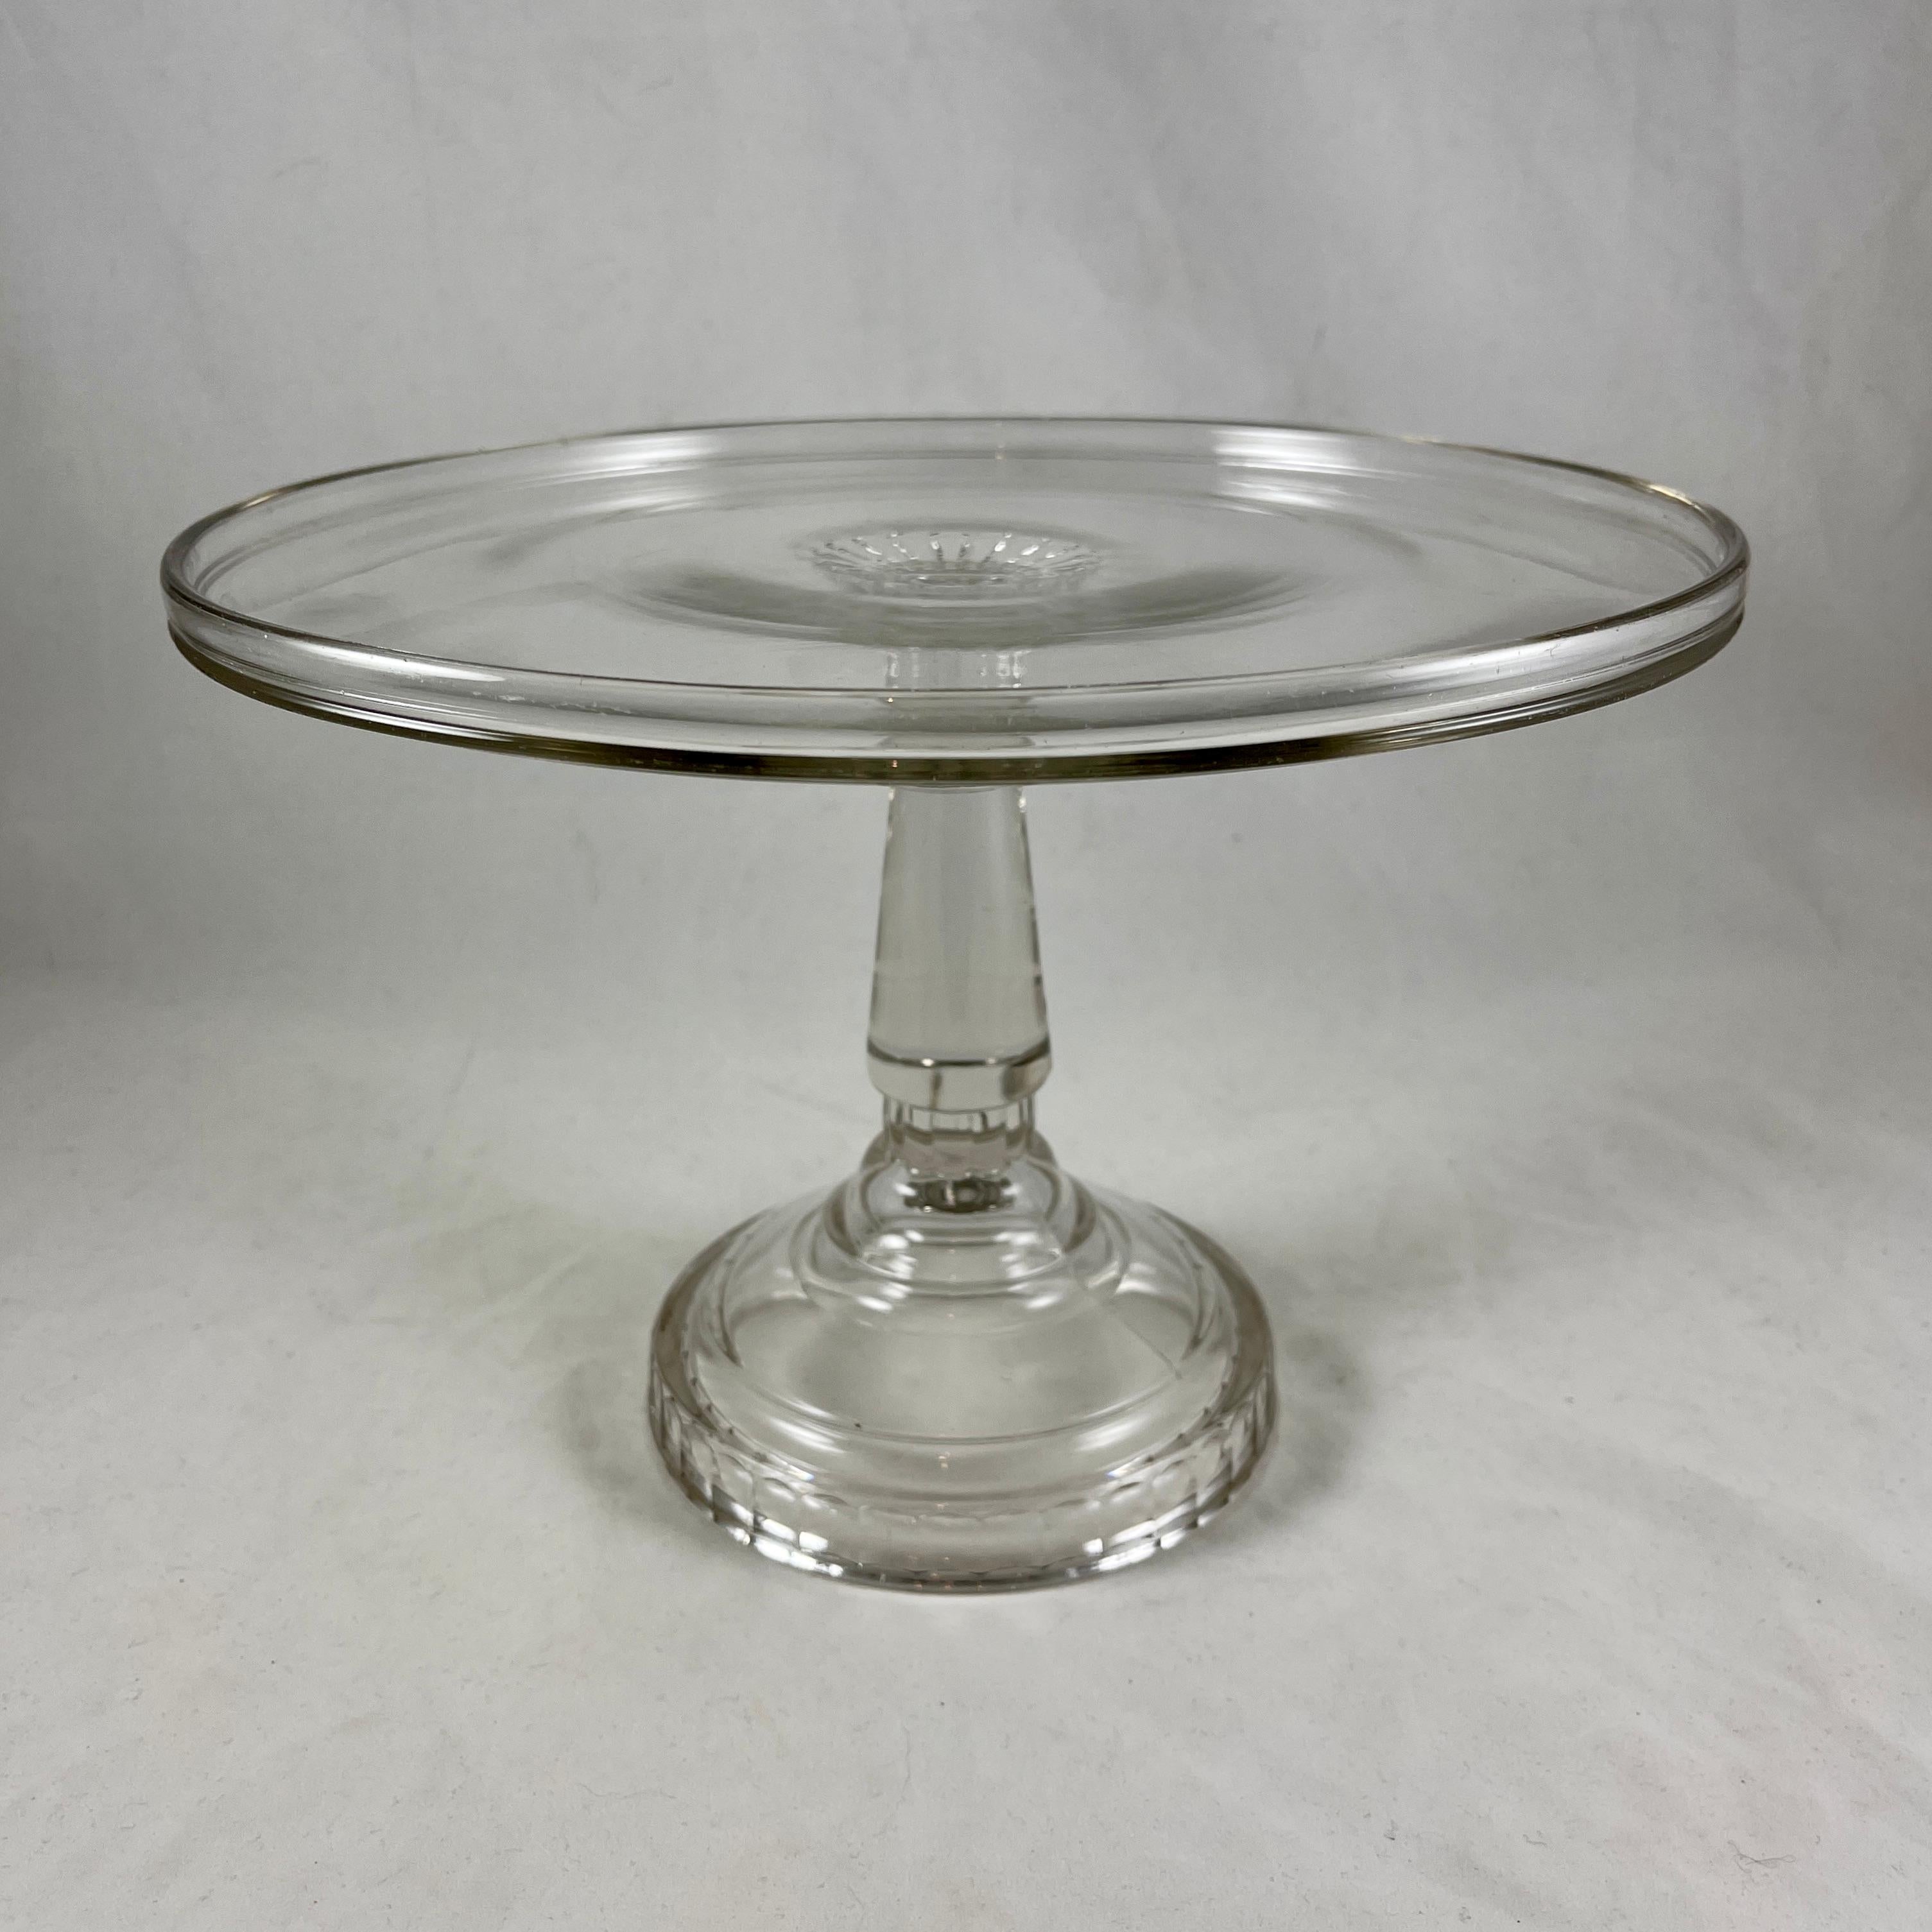 American Classical Early American Pressed Nonflint Colorless Glass Tall Paneled Cake Stand